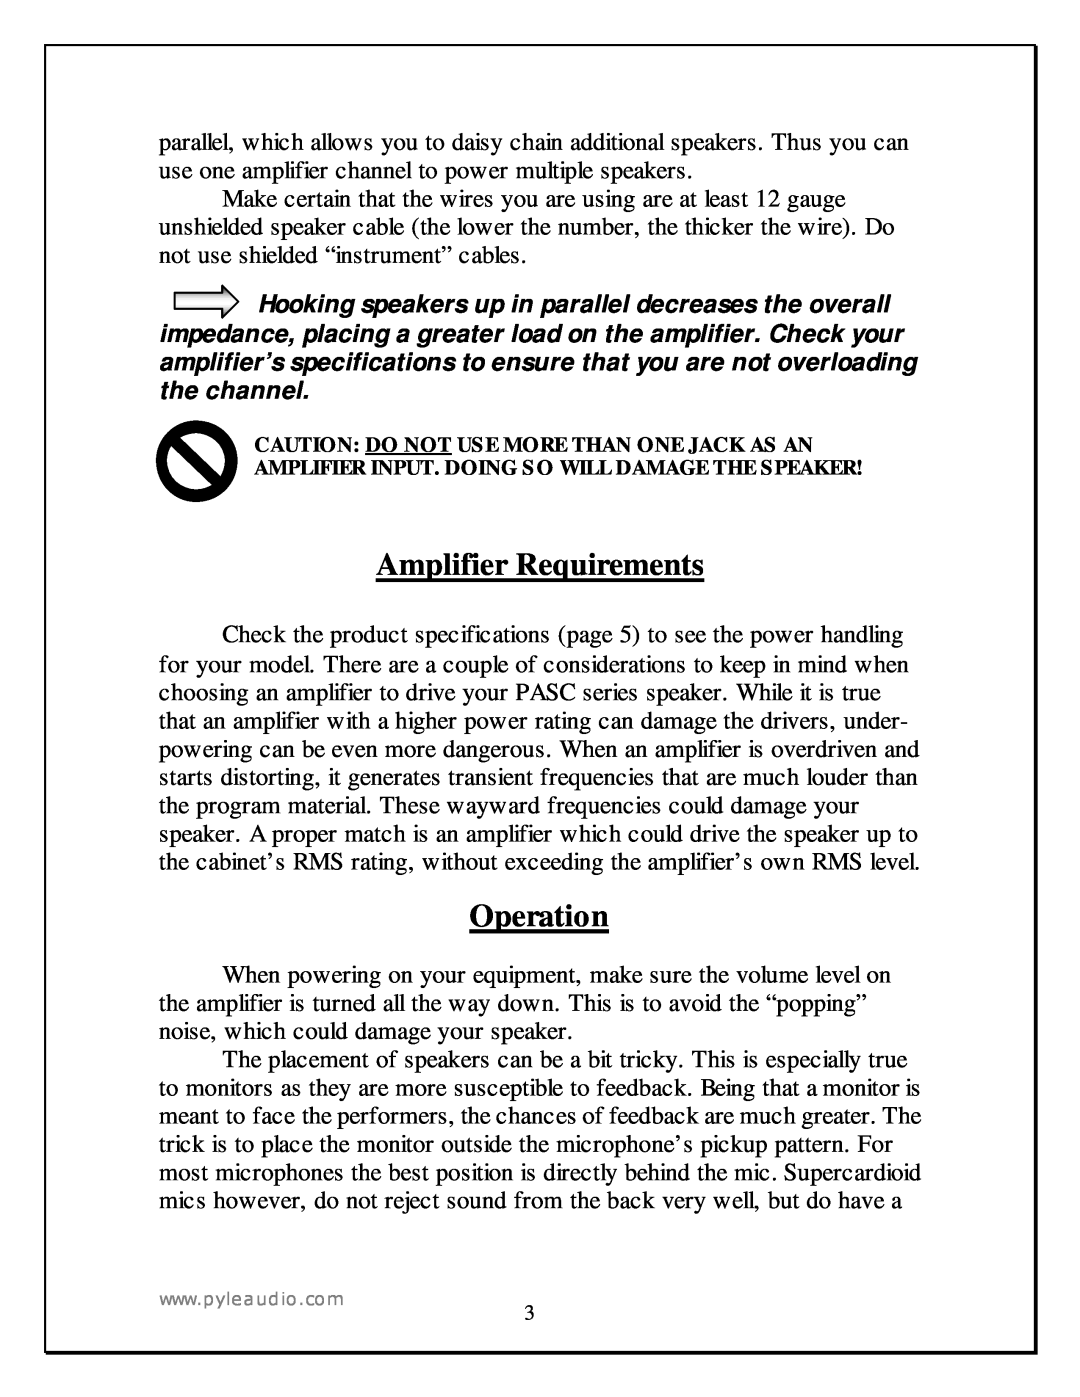 Radio Shack PASC12 manual Amplifier Requirements, Operation 